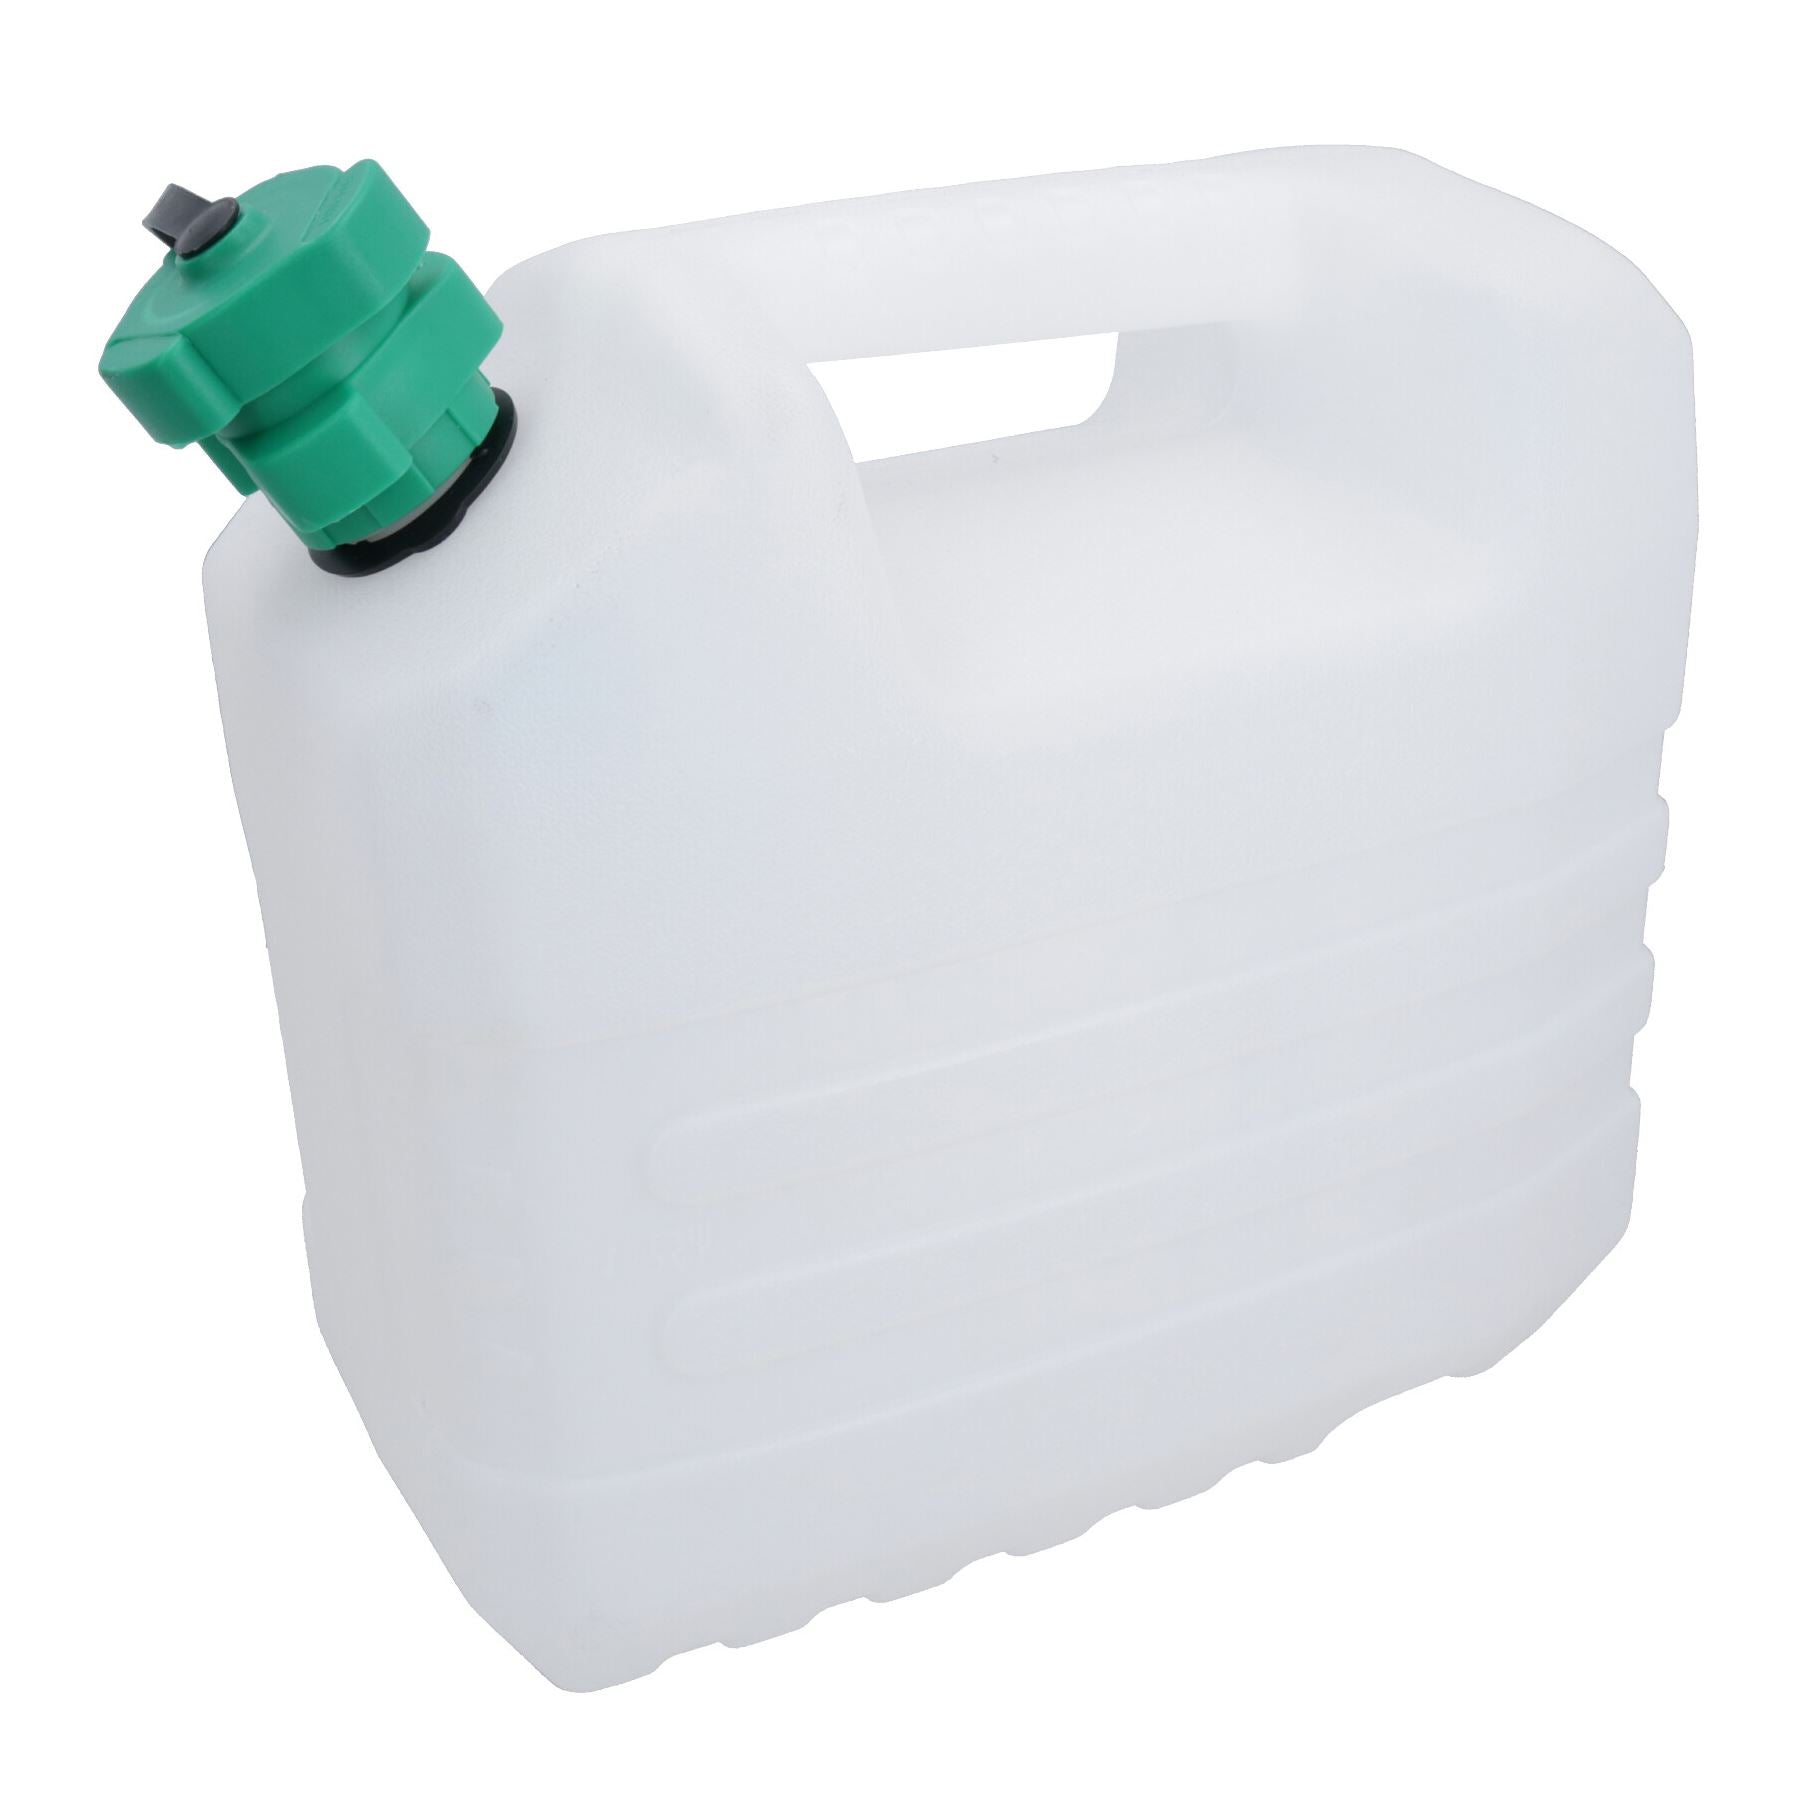 10 Litre Drinking Water Tank with Spout Container Camping Caravan Camping